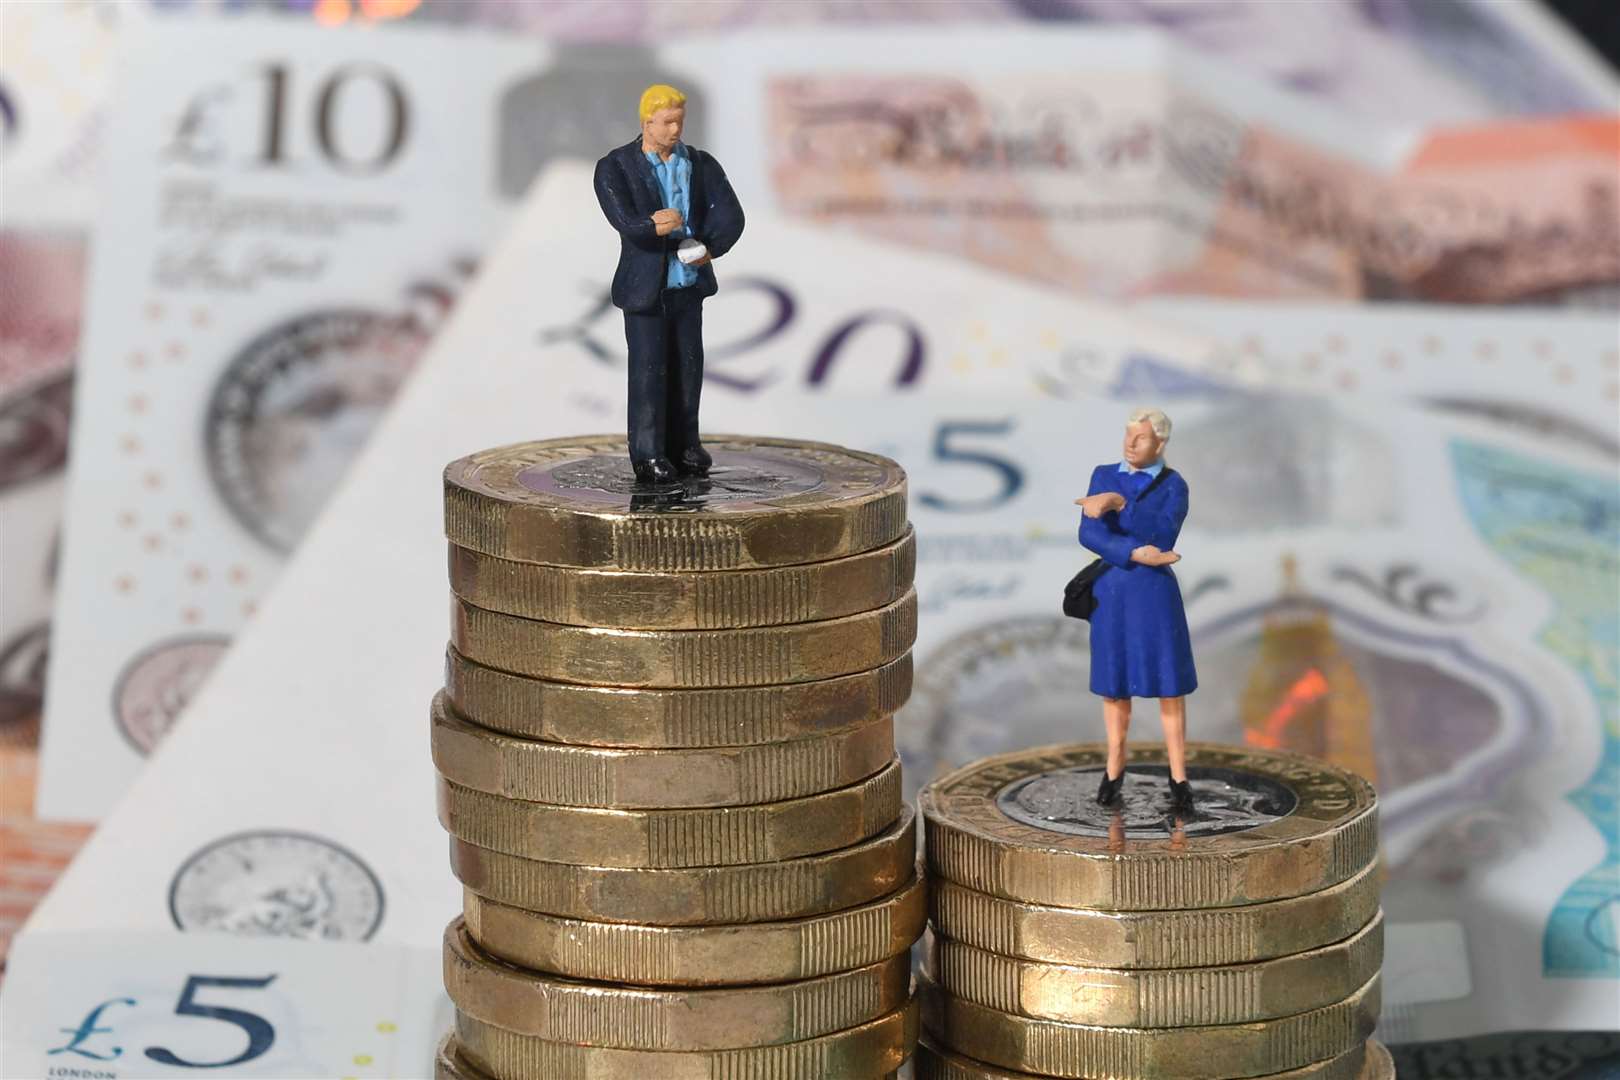 There are only 22 Kent companies where women earn more than men, out of a total 253 included in the report